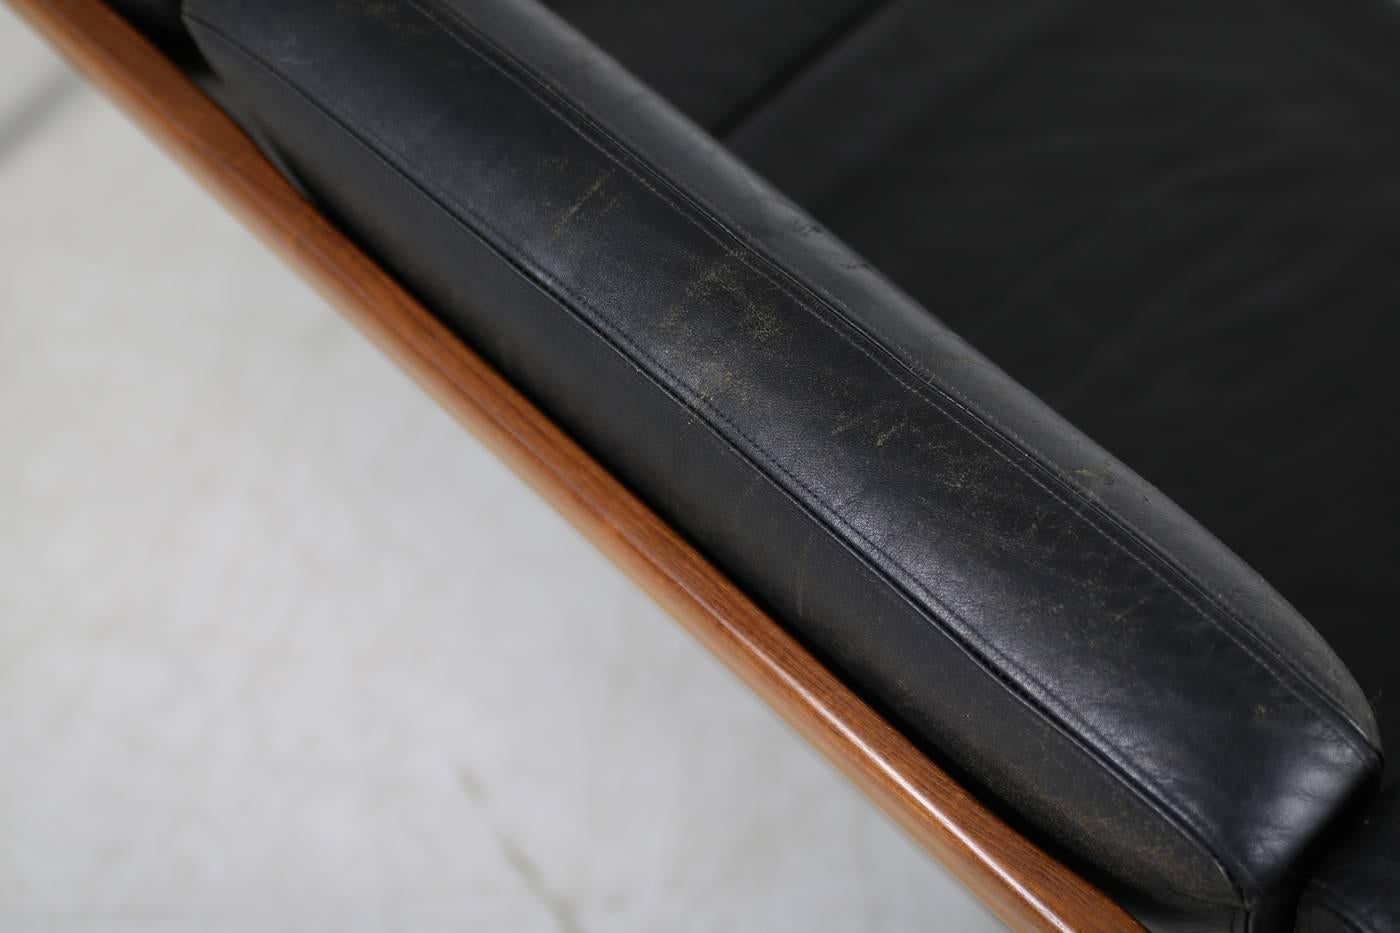 Mid-Century Modern 1960s Danish Modern Vintage Sofa by Ole Wanscher in Teak and Black Leather